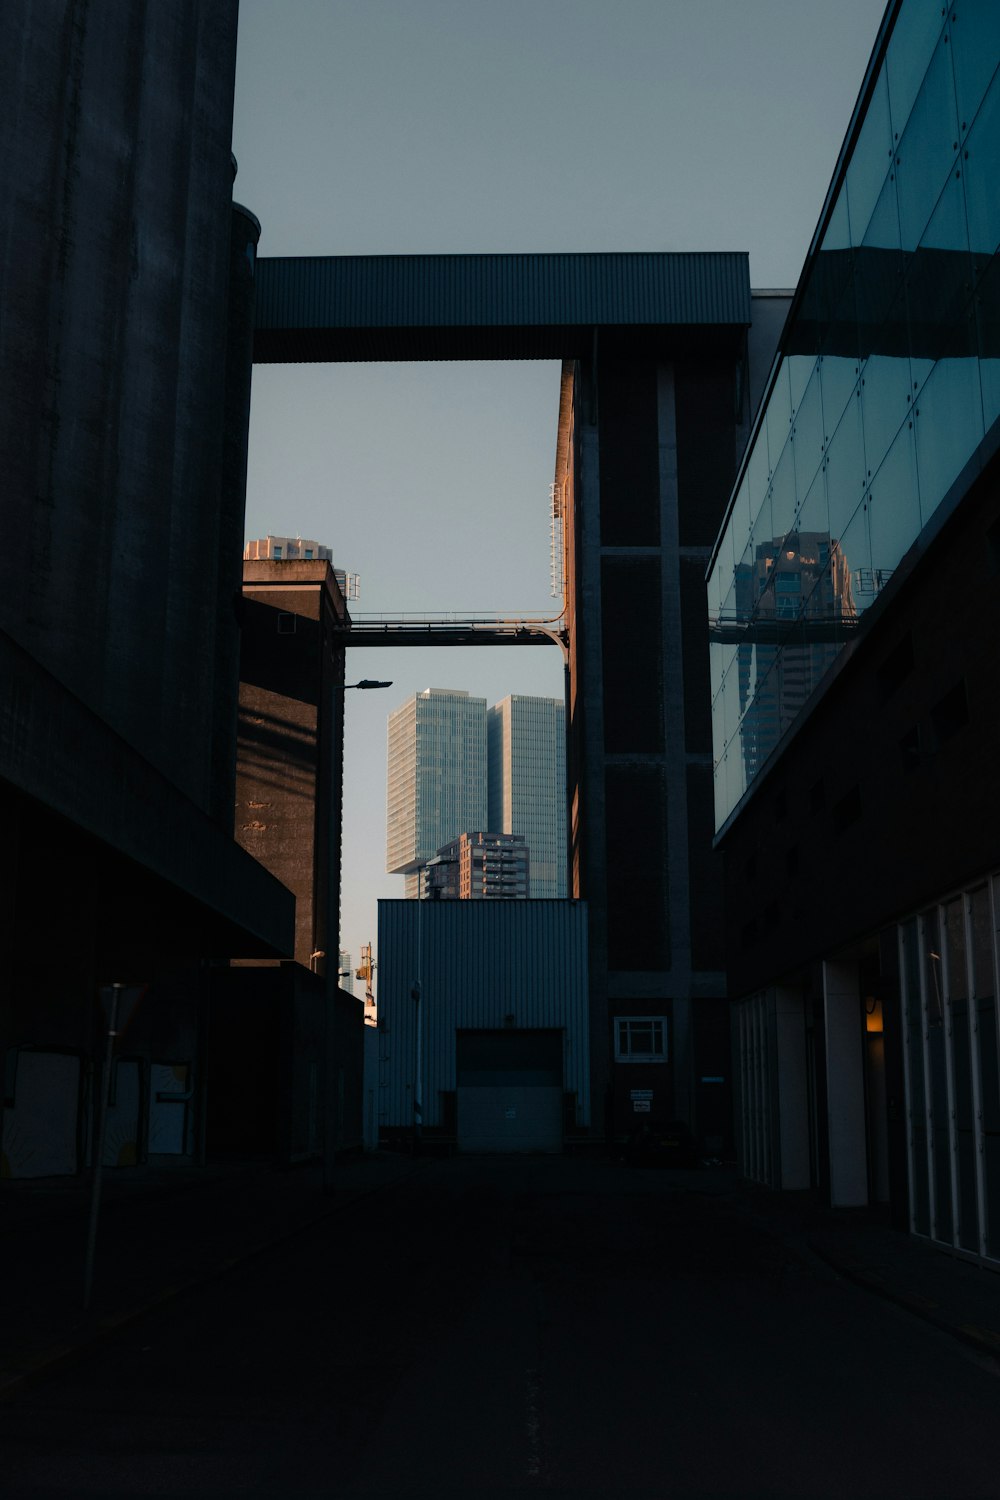 a view of a city from an alley way